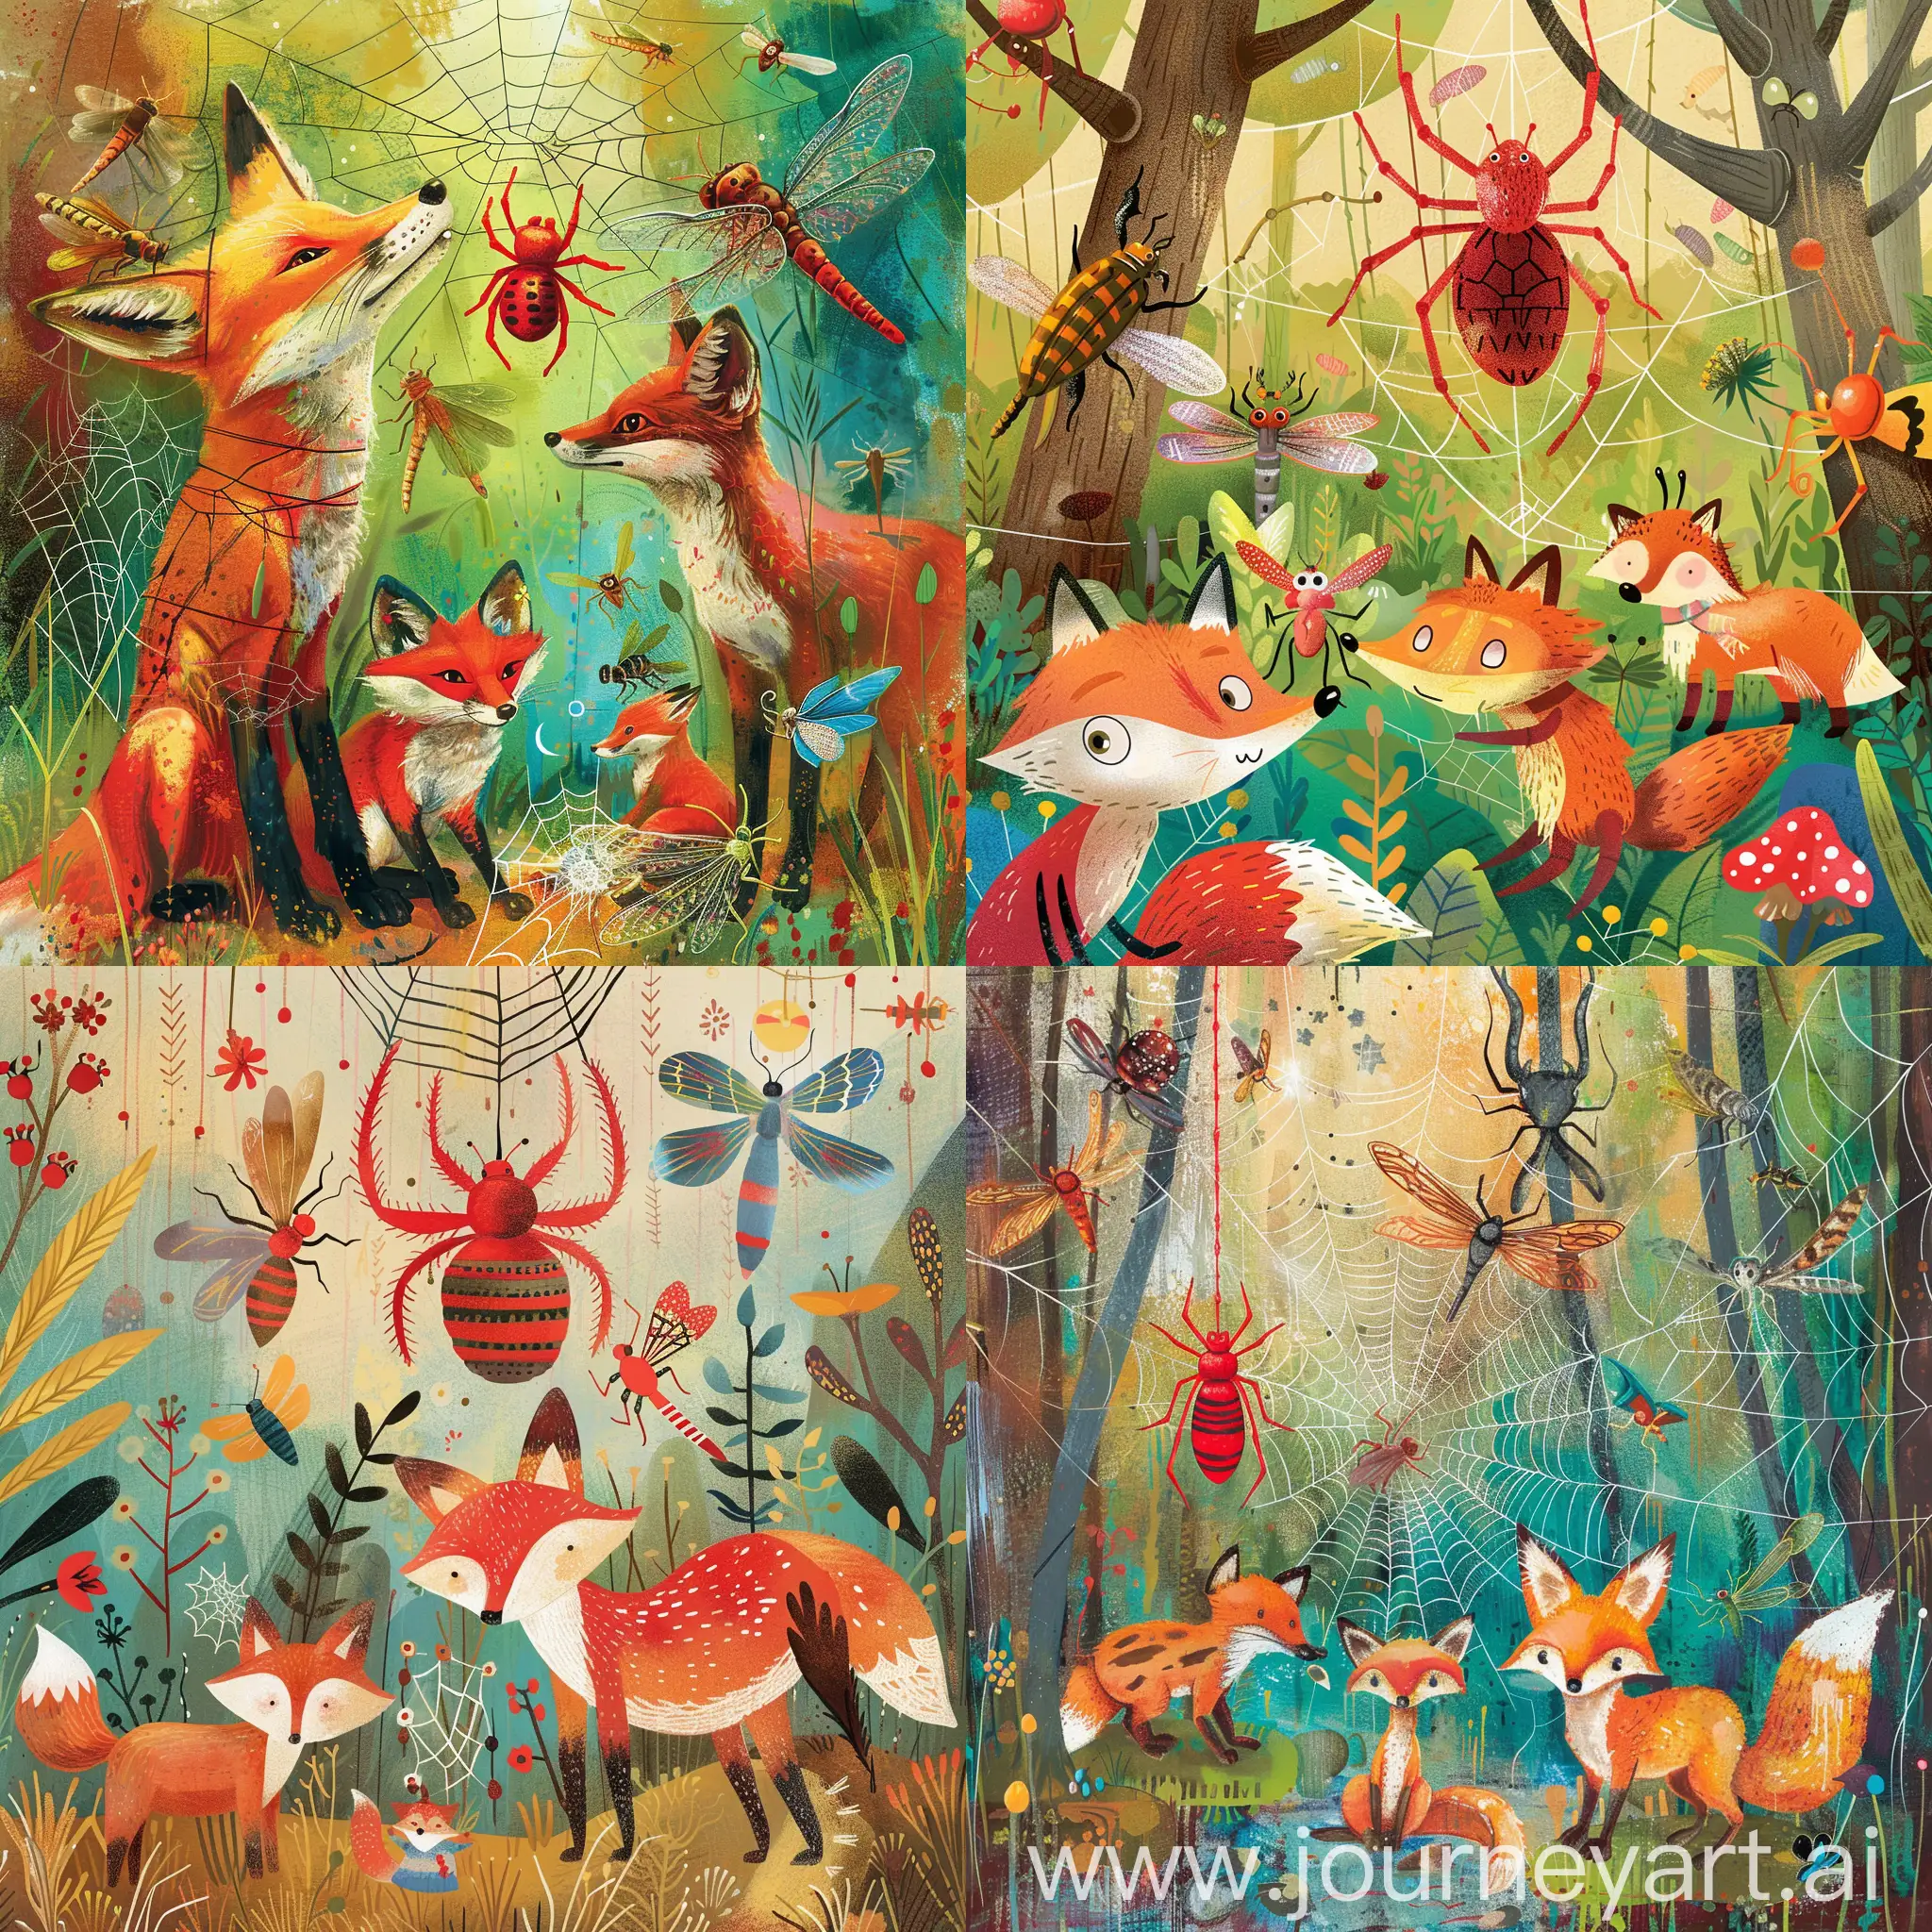 Designed in the style of a "woodland animal fairy tale ((red spider hanging from a web))" (focus), featuring enchanting and friendly scarabs, foxes, dragonflies, mythical creatures, and whimsical characters on a colorful background to capture the attention and spark the imagination of young readers.